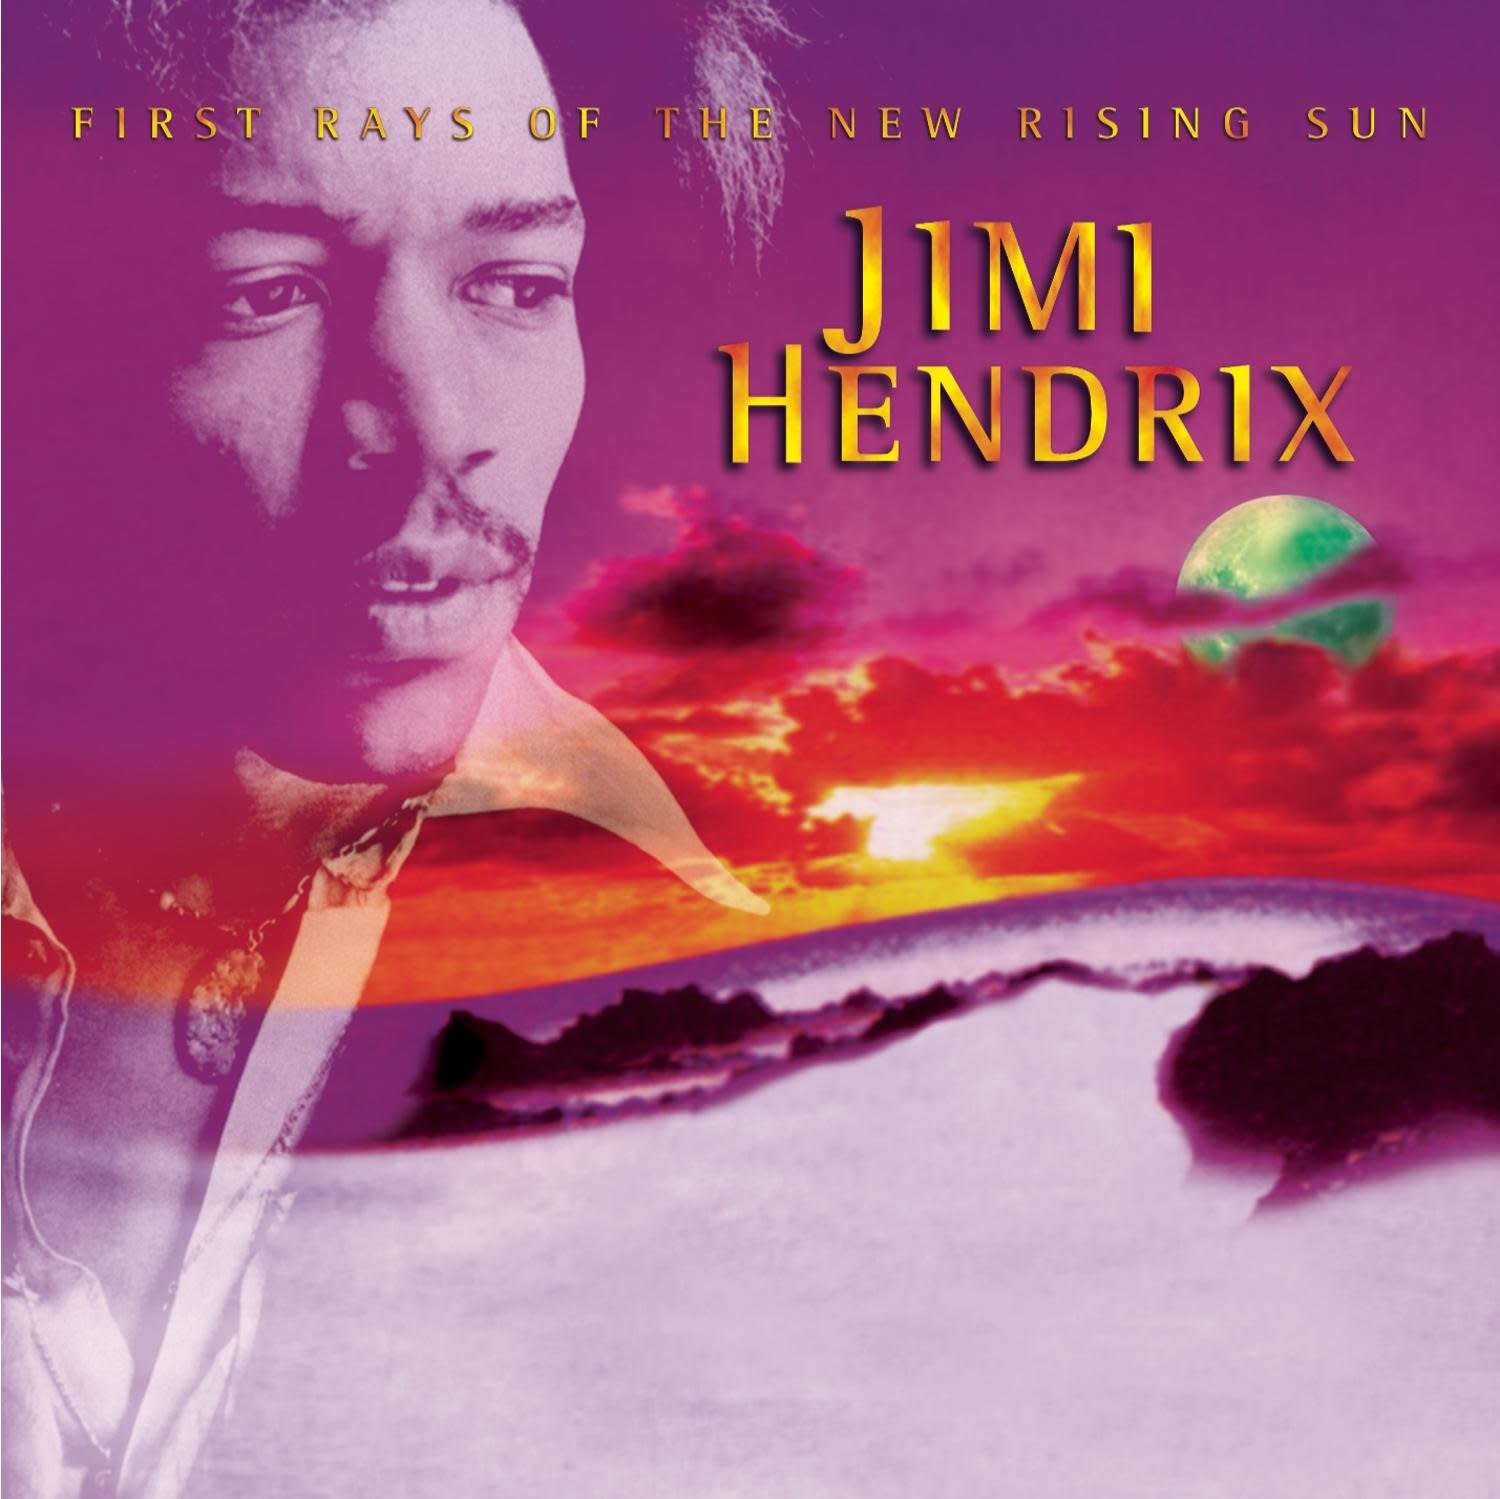 Sony Jimi Hendrix - First Rays Of The New Rising Sun